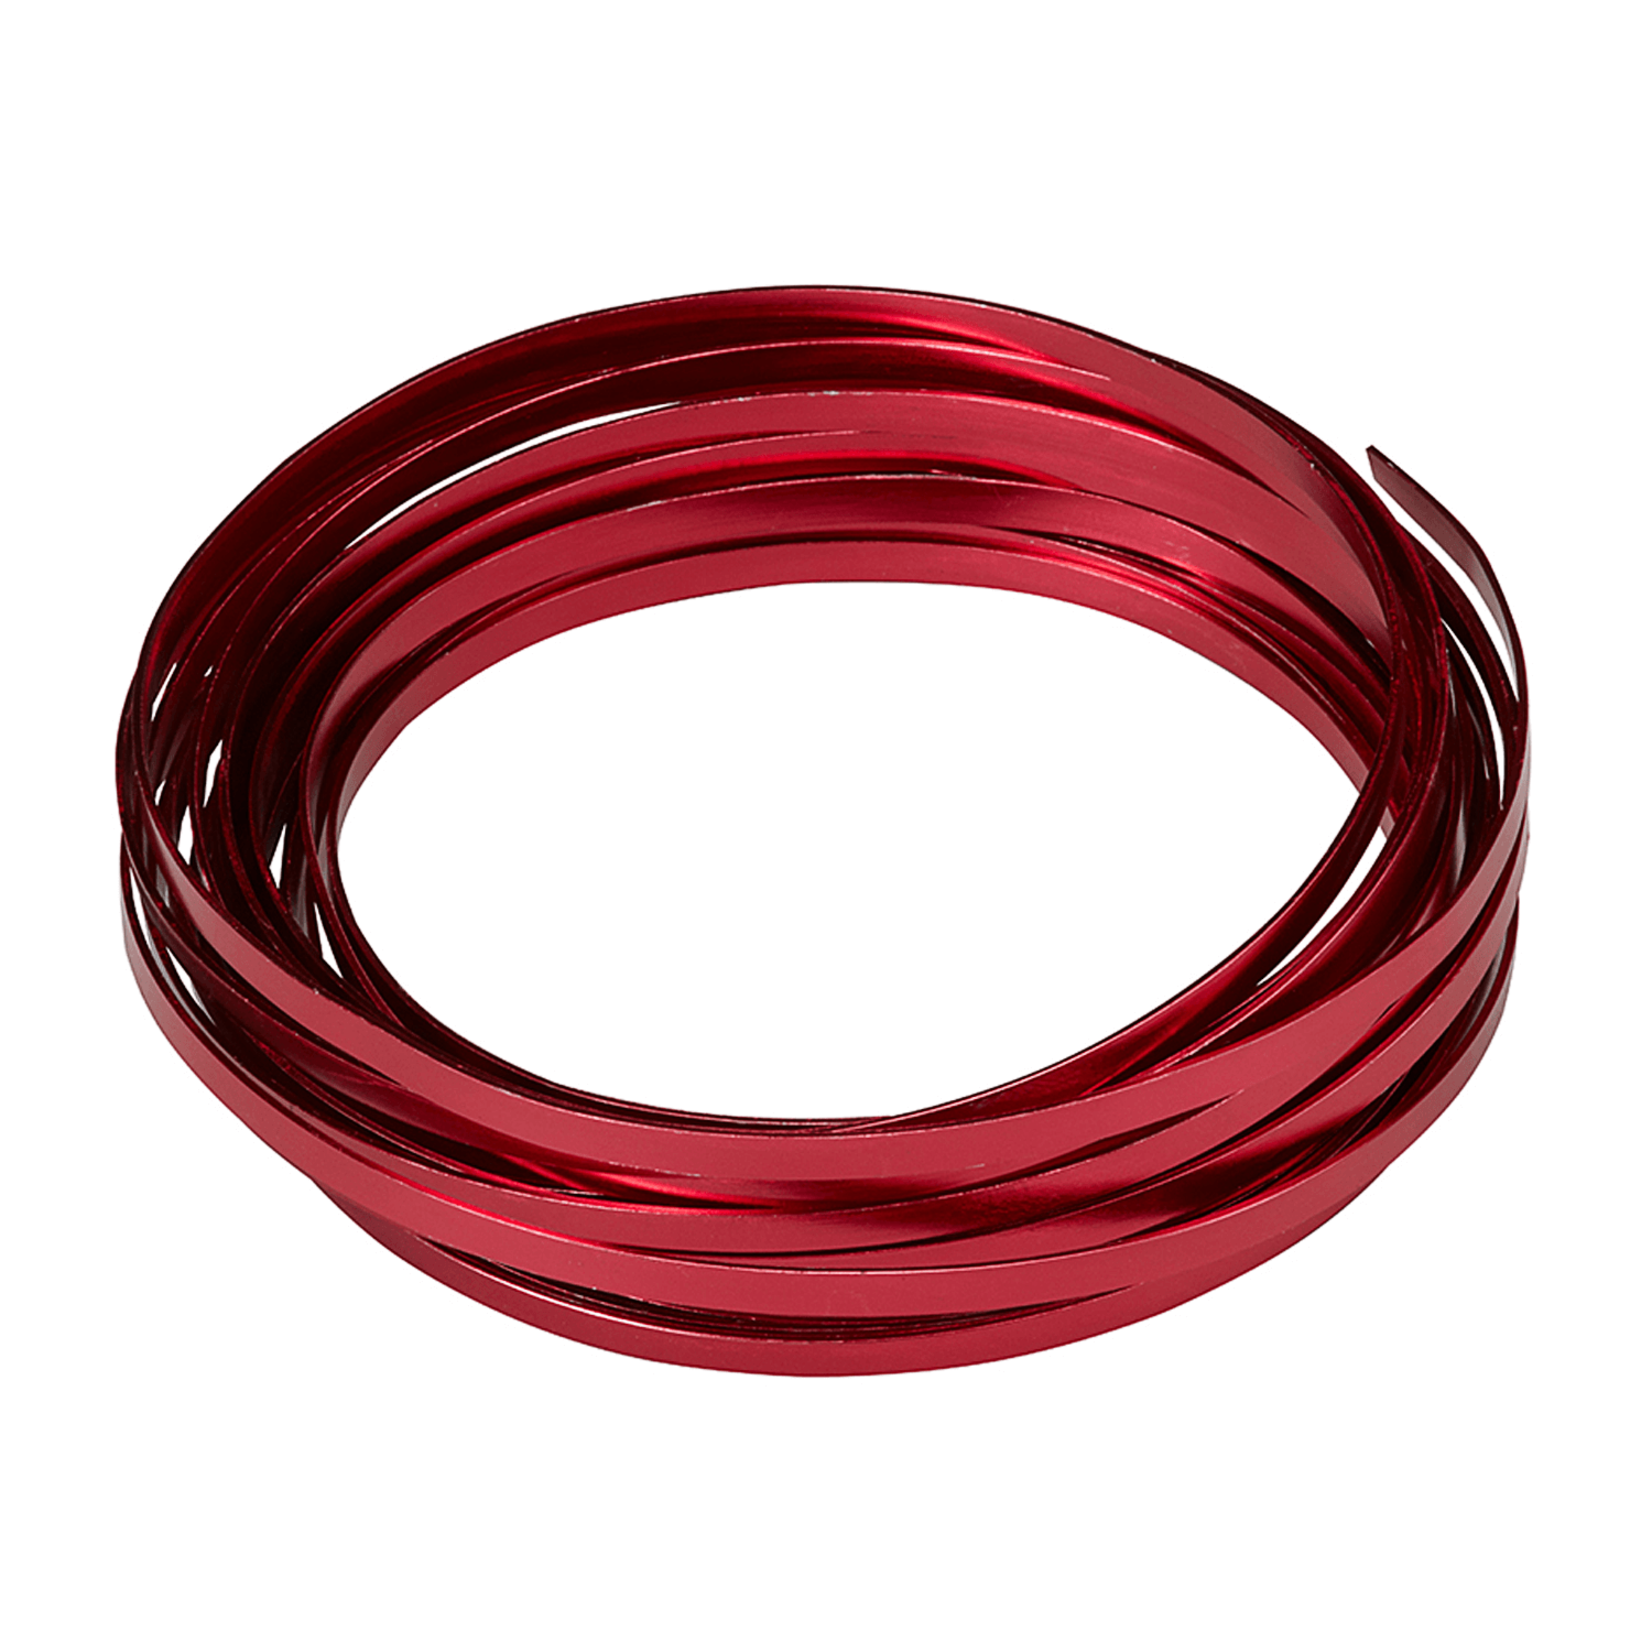 RED 5MM X 29.5' FLAT ALUMINUM WIRE